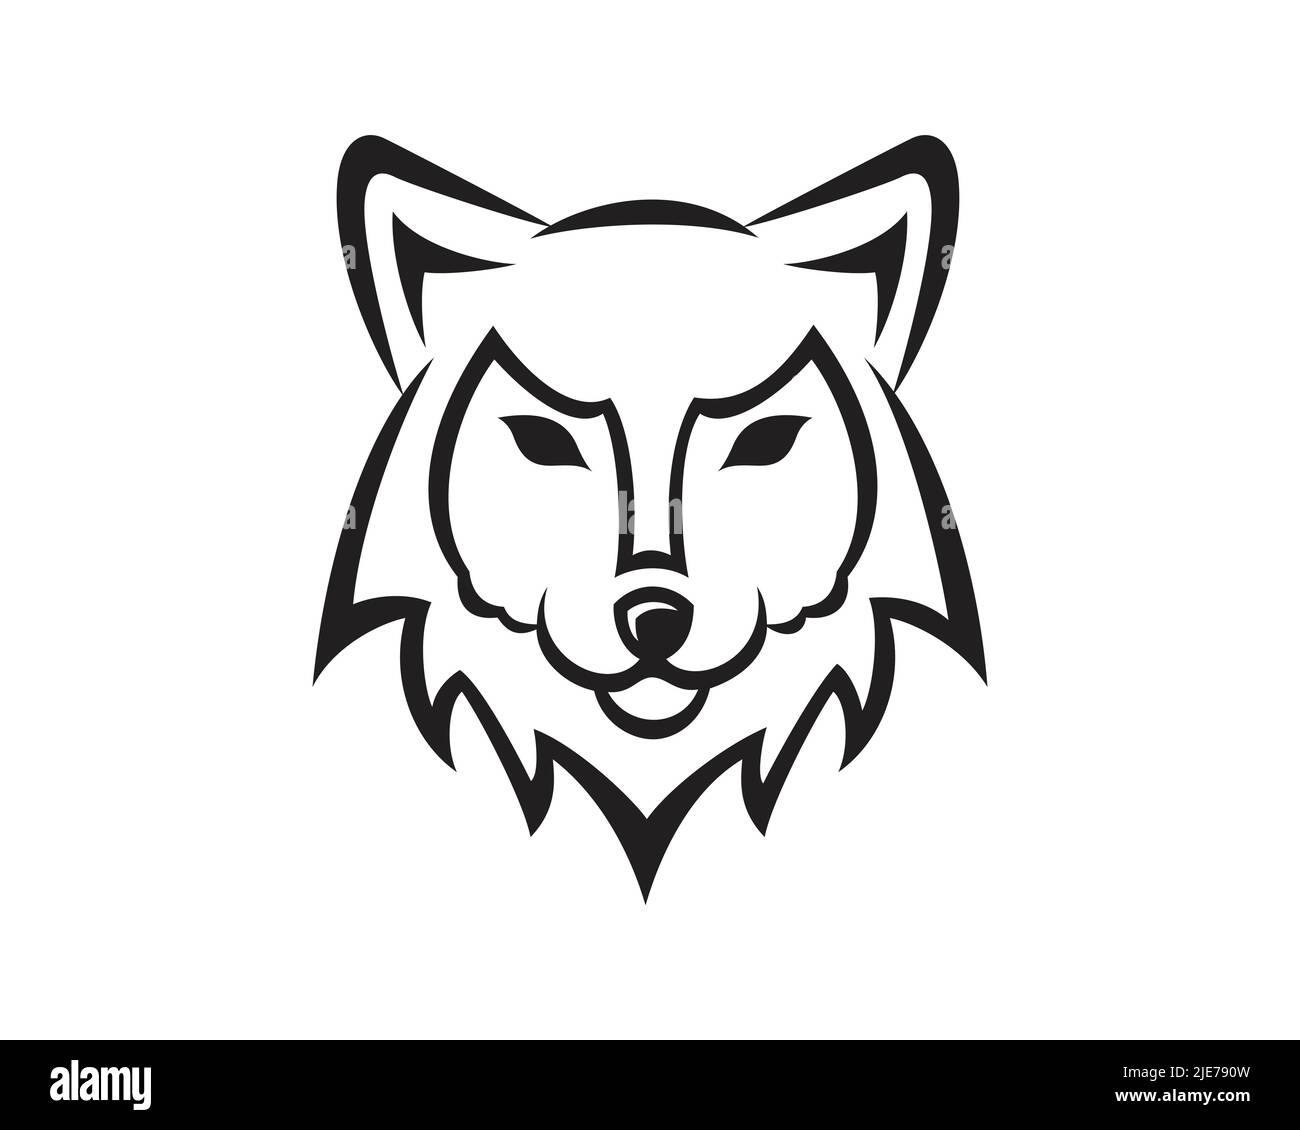 Wolf Head visualized with Silhouette Style Stock Vector